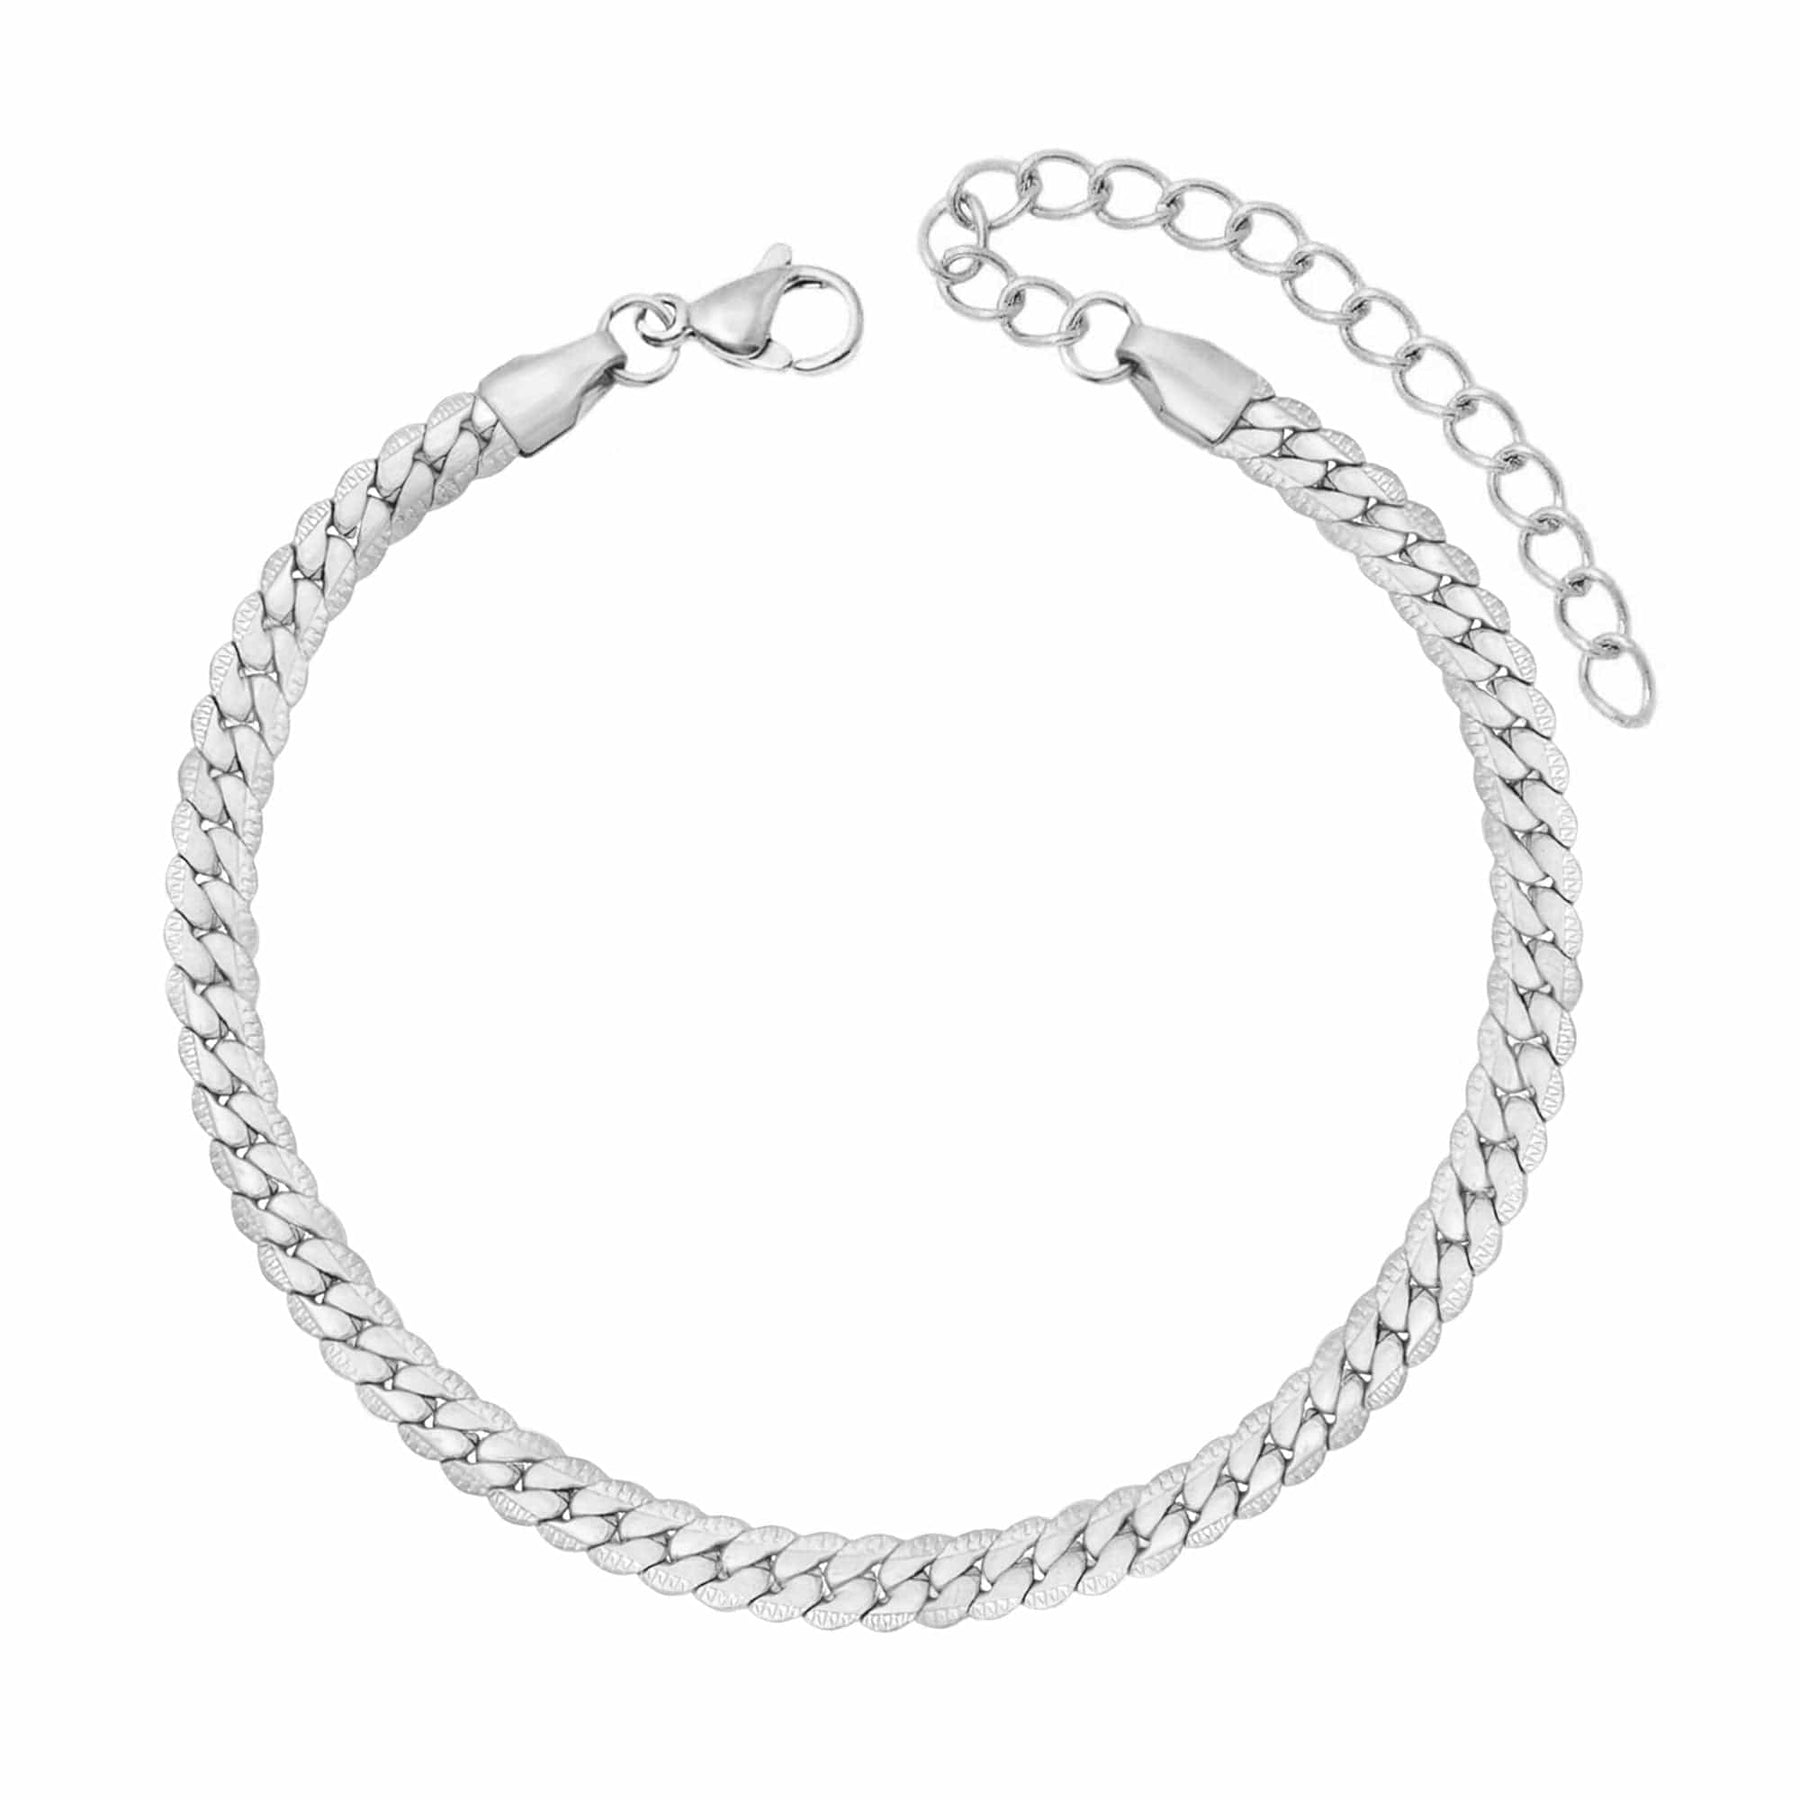 BohoMoon Stainless Steel Liberty Anklet Silver